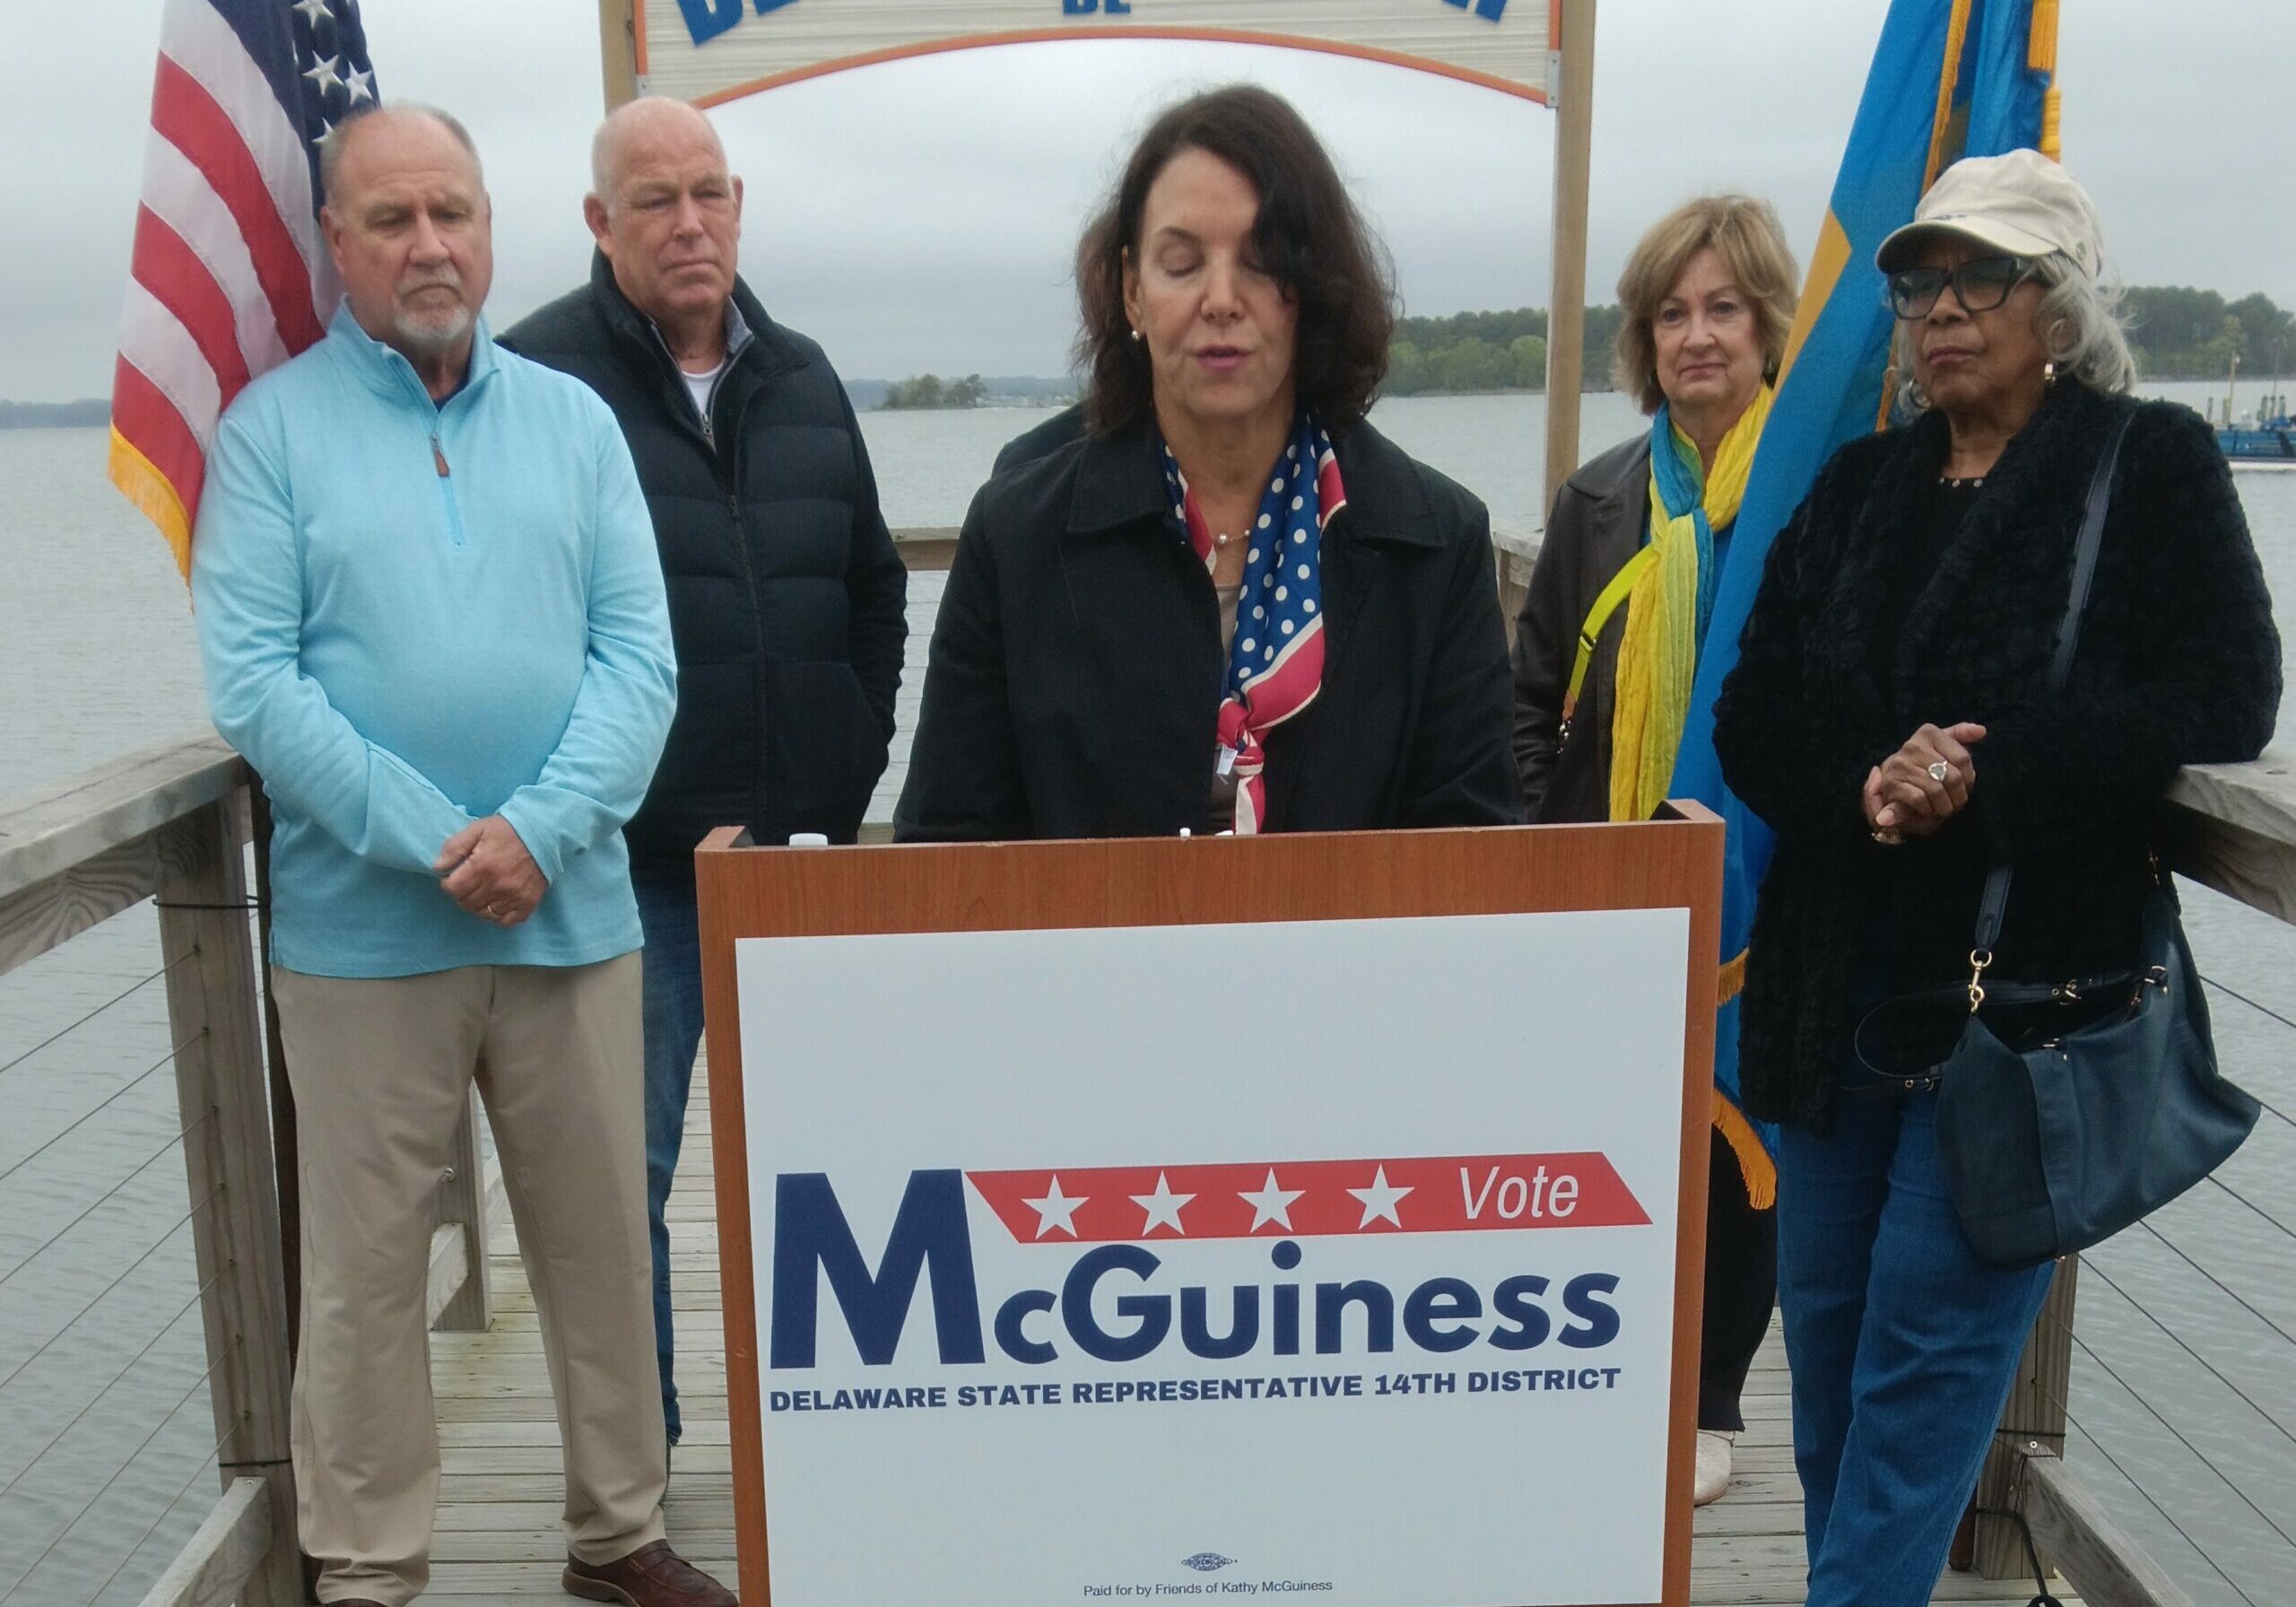 Kathy-McGuiness-14th-District-run-for-nominee-announcement-edited2